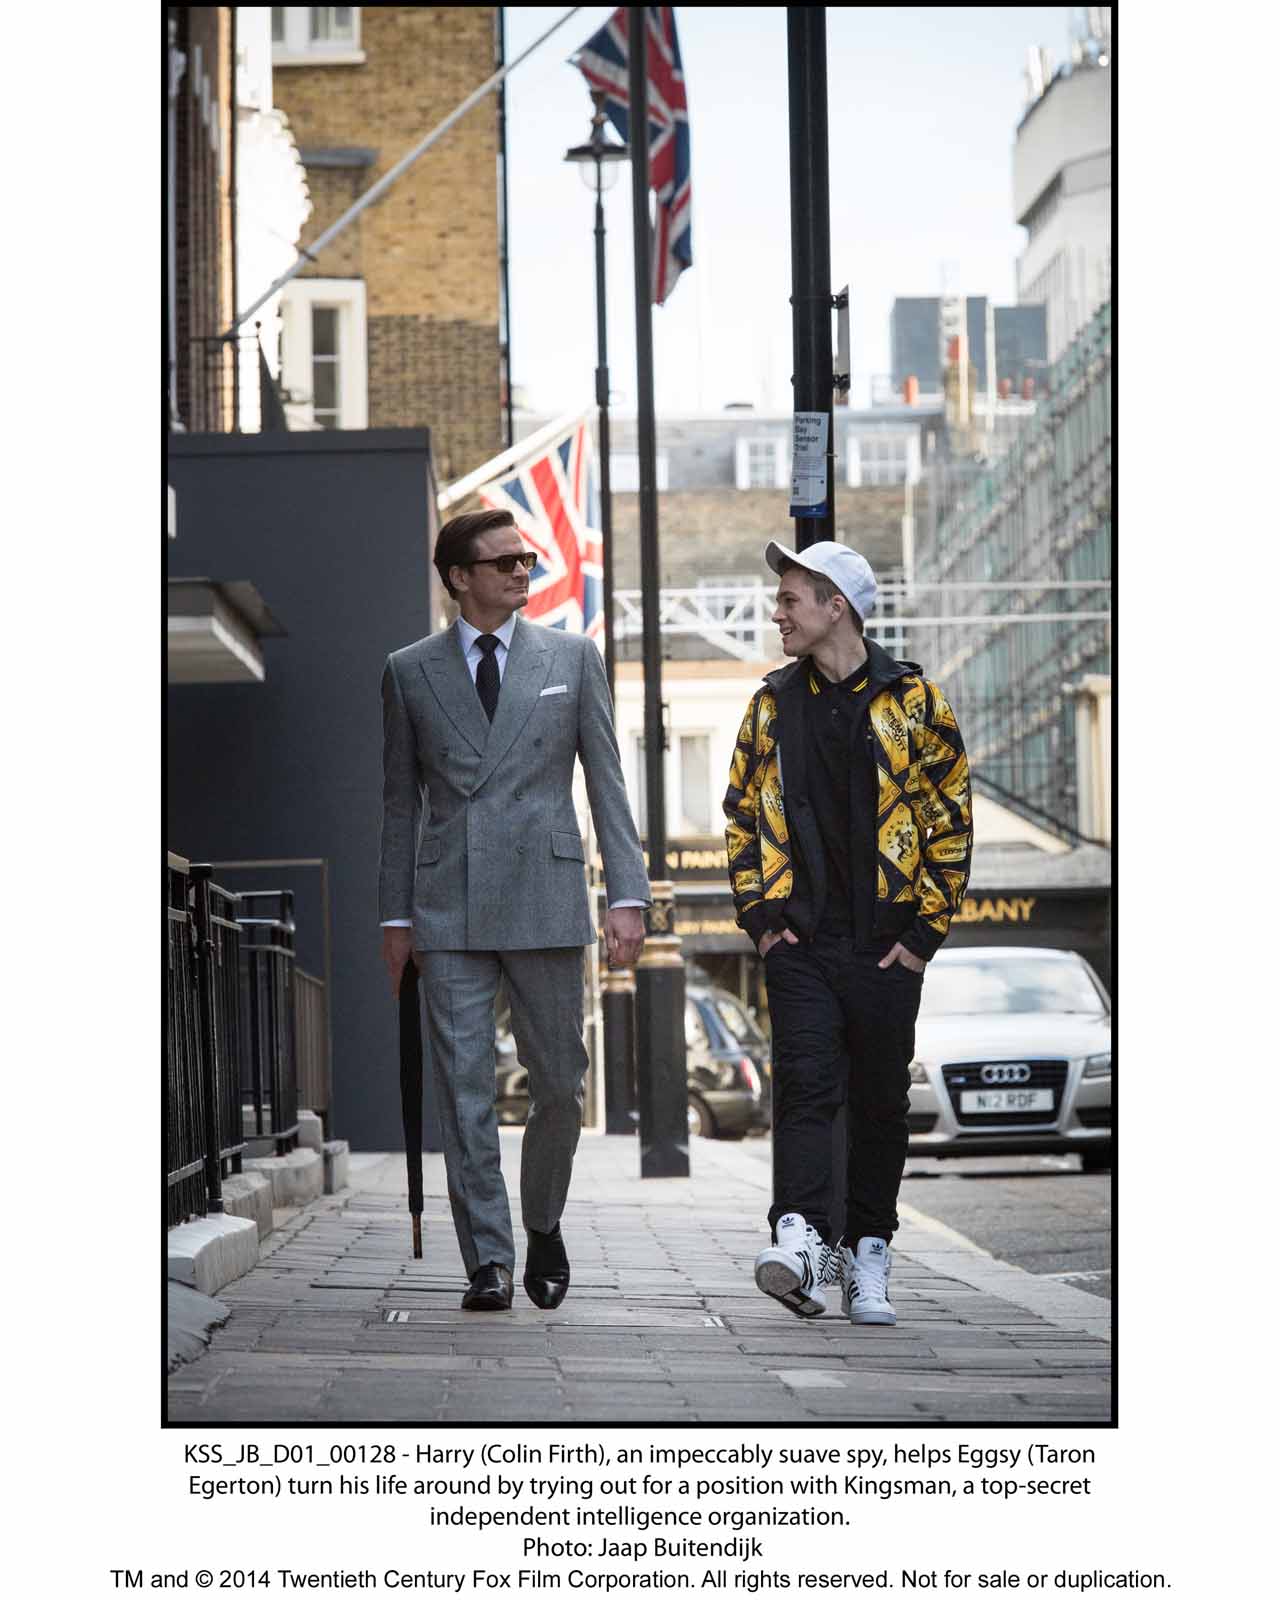 KSS_JB_D01_00128 - Harry (Colin Firth), an impeccably suave spy, helps Eggsy (Taron Egerton) turn his life around by trying out for a position with Kingsman, a top-secret independent intelligence organization.